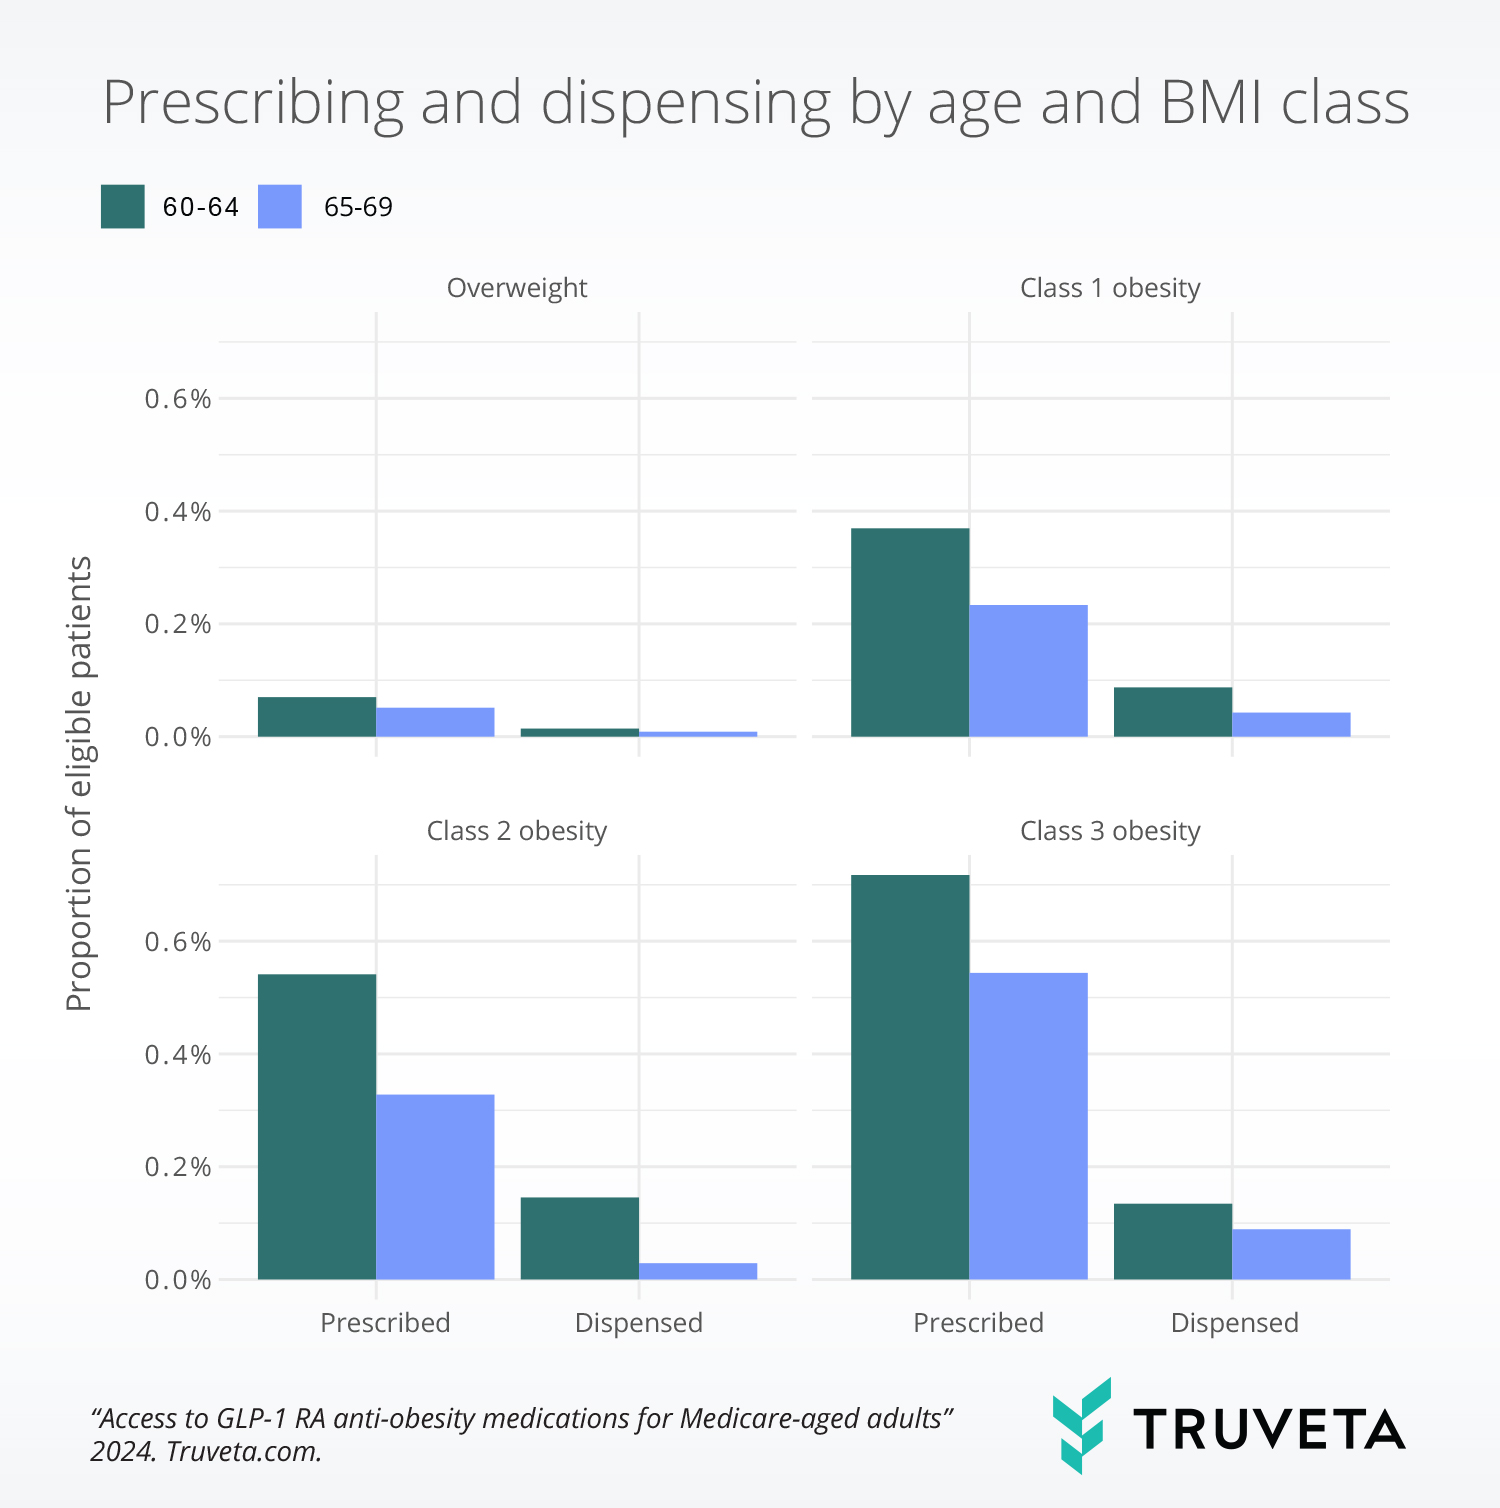 Truveta Research and Zeke Emanuel, MD, PhD, from the University of Pennsylvania explored the first-time prescribing and dispensing of GLP-1 RA anti-obesity medications for US older adults aged 60 to 69 with obesity or overweight who don’t have type 2 diabetes.